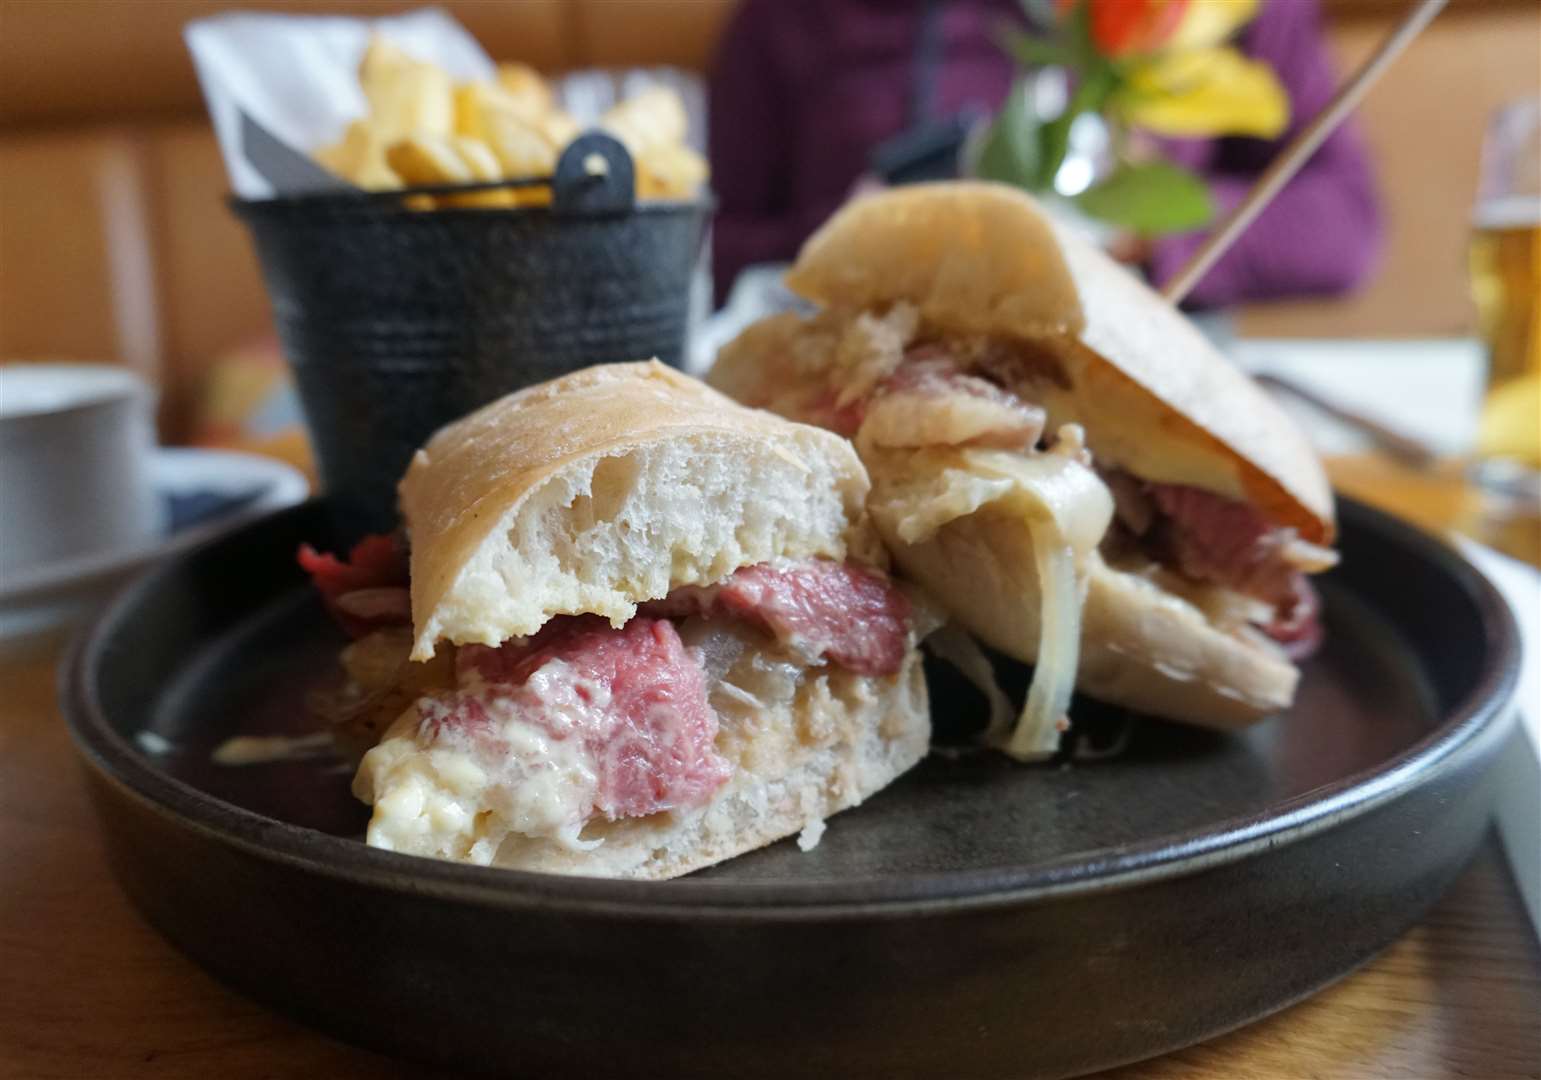 Tender steak in a ciabatta with mayo and mustard sauce and caramelised onions. Yum. Picture: Federica Stefani.